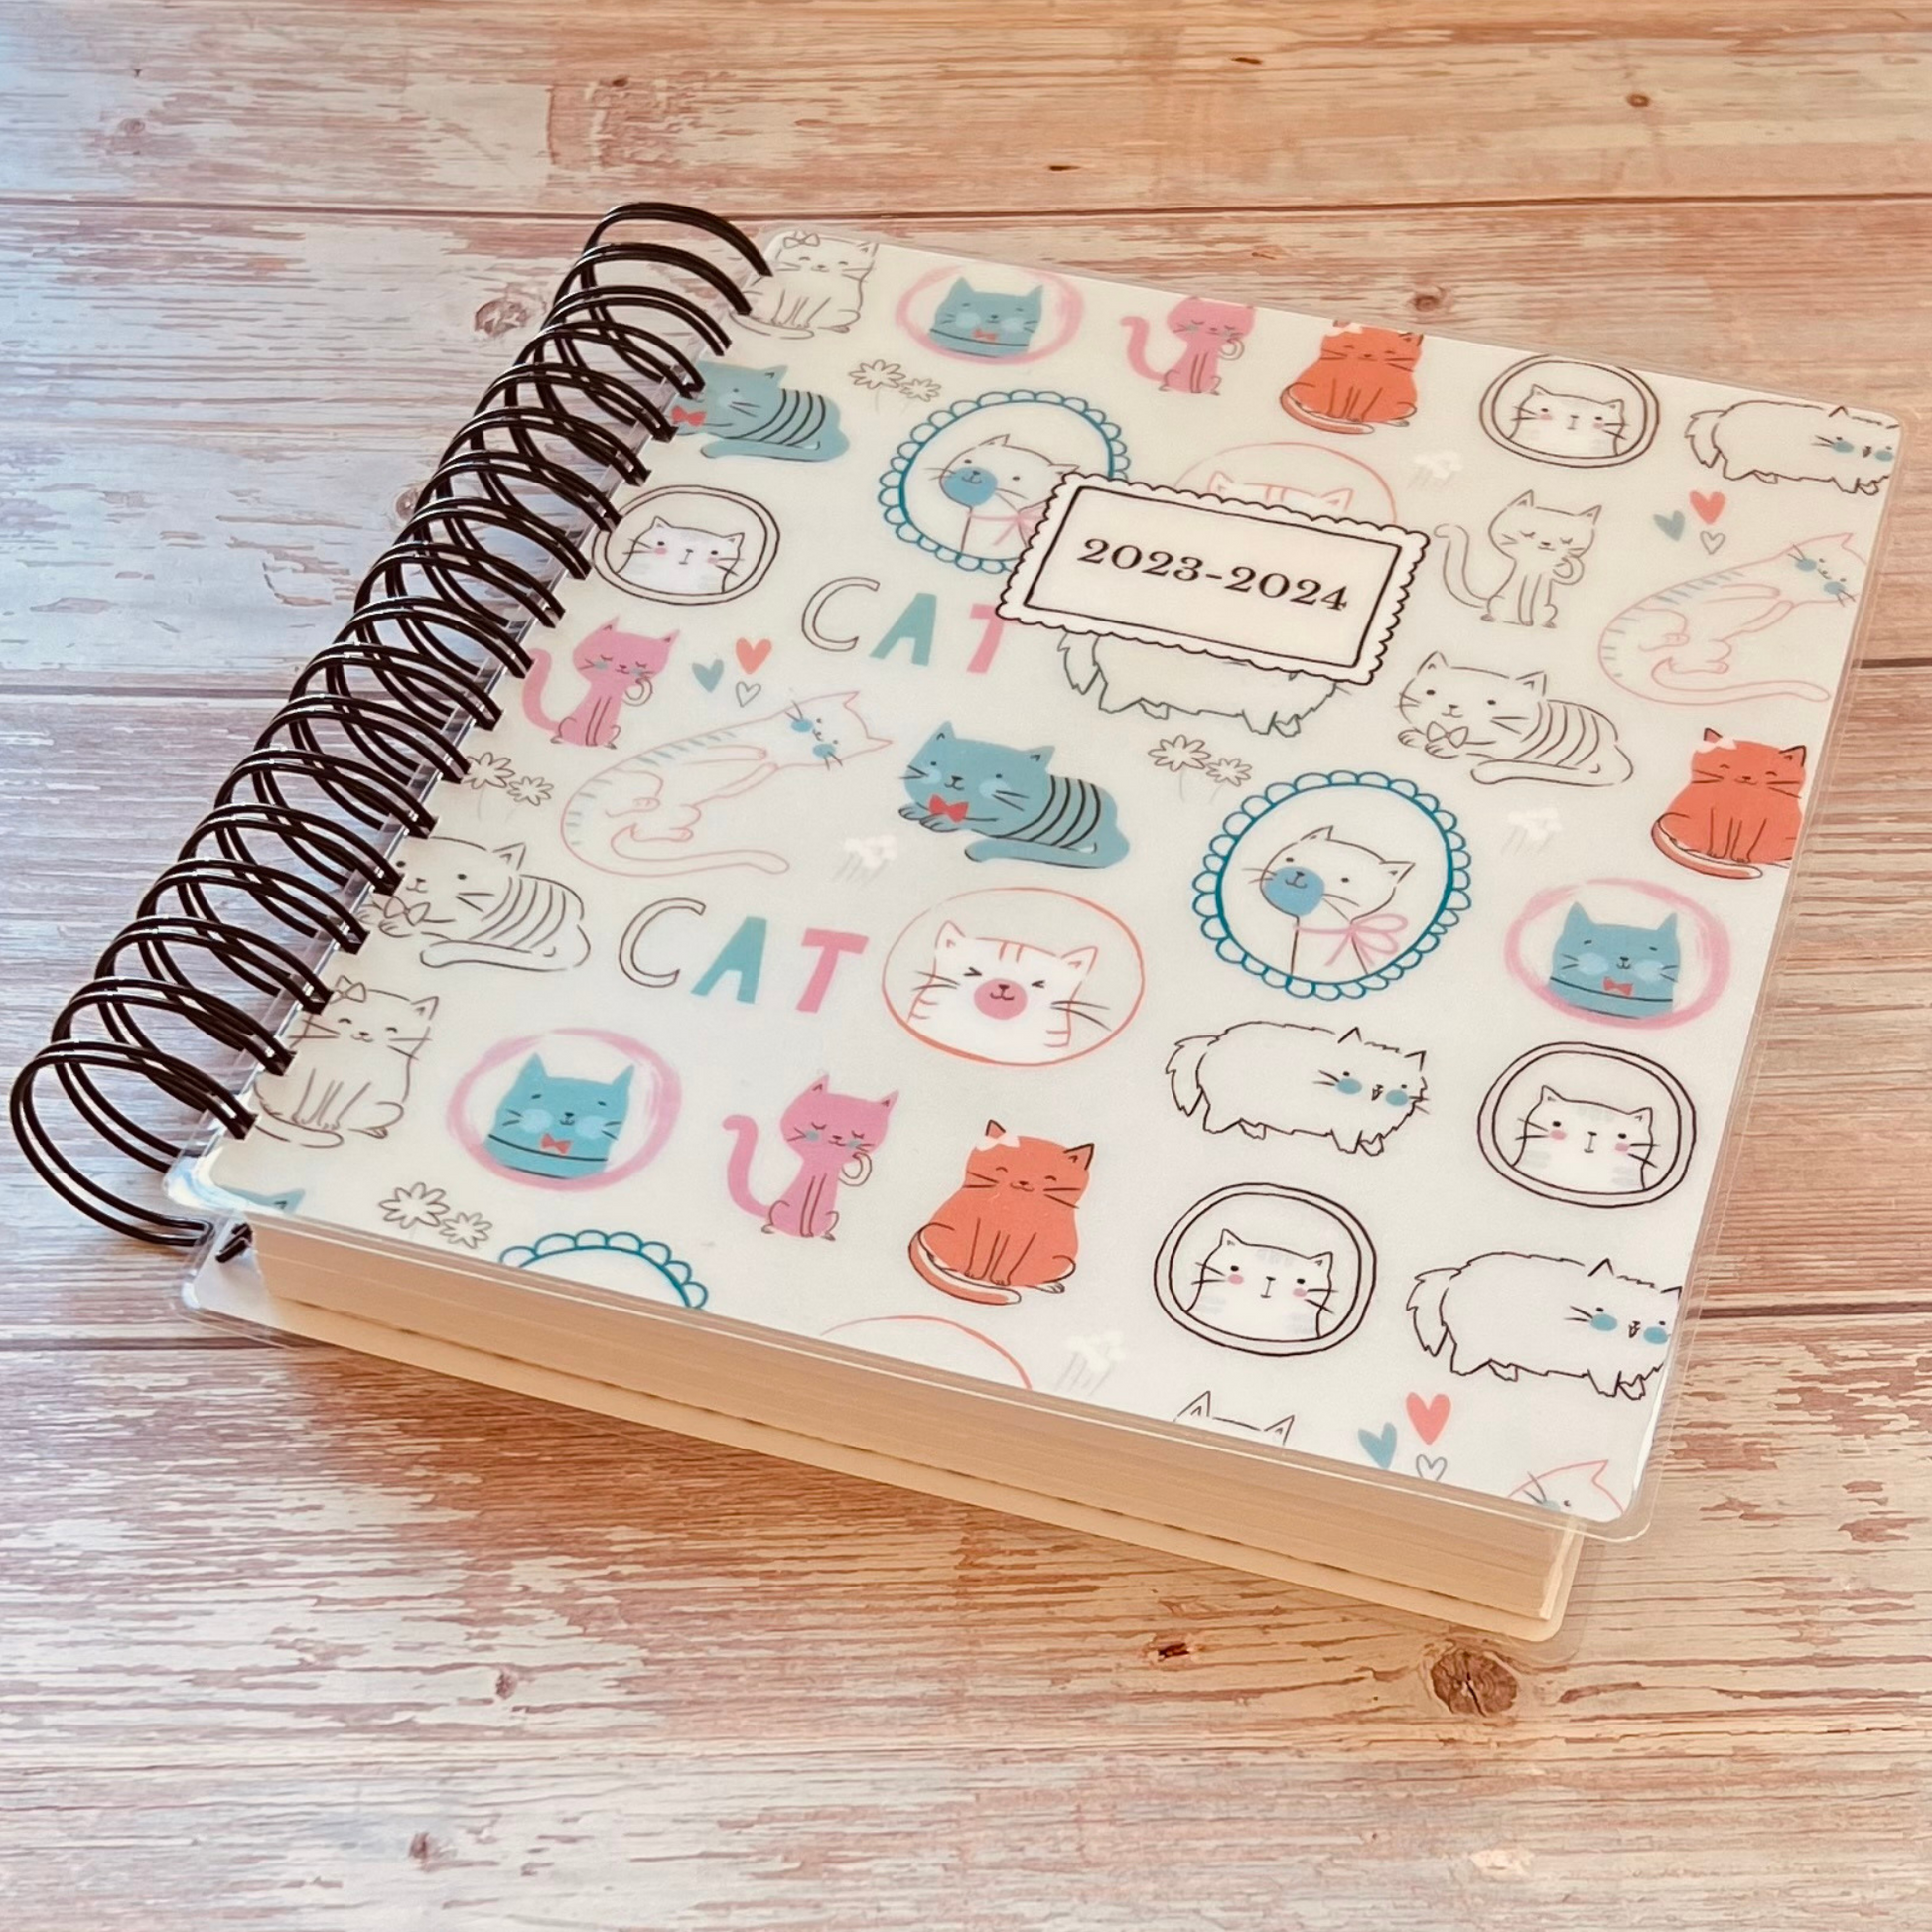 Personalized 6 Month Daily Planner 2023-2024 | Cat Love Daily Planners Artful Planner Co. 